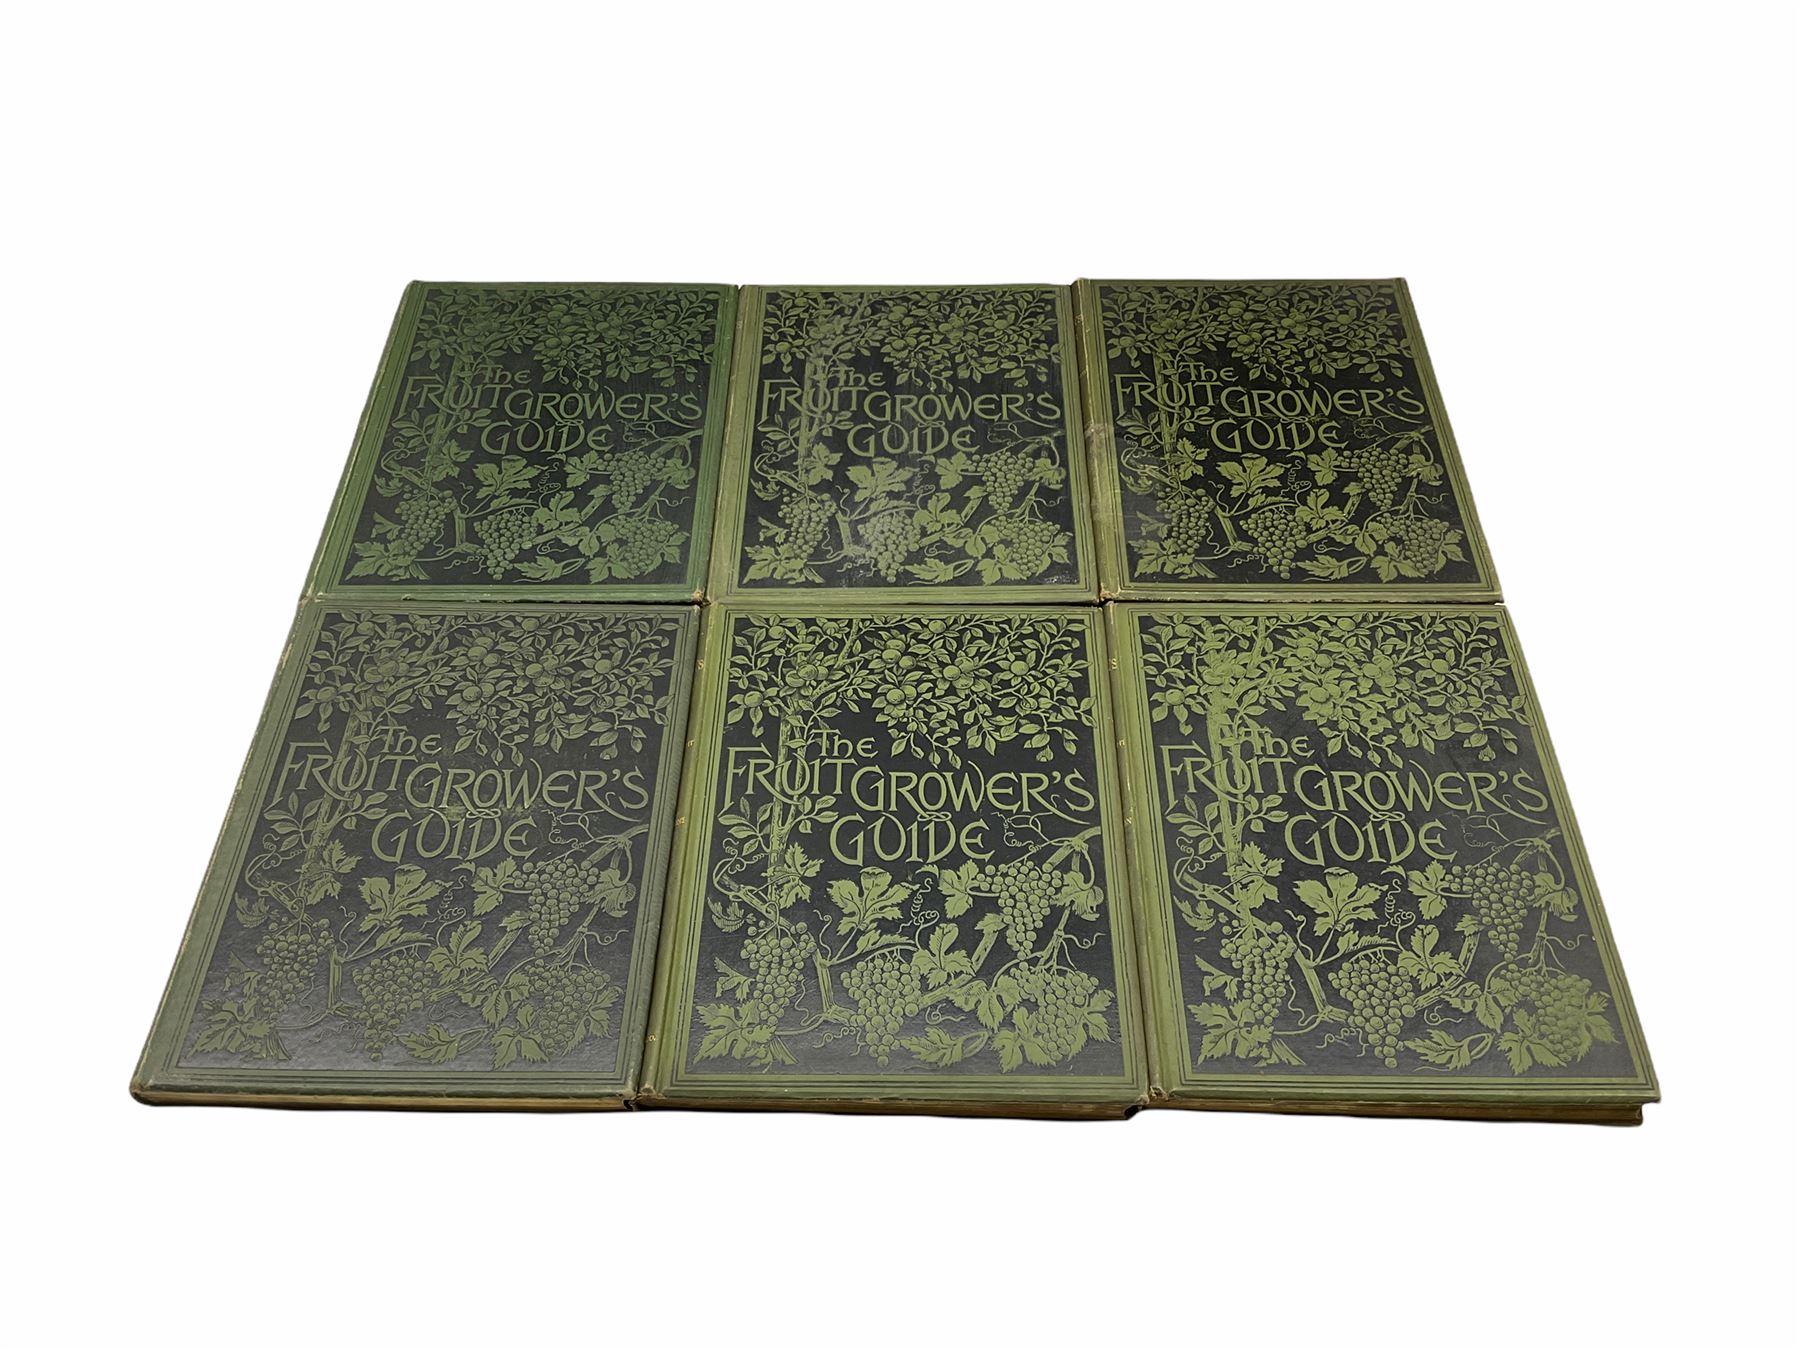 John Wright - The Fruit Growers Guide published Virtue & Co in 6 volumes with chromolithographs by M